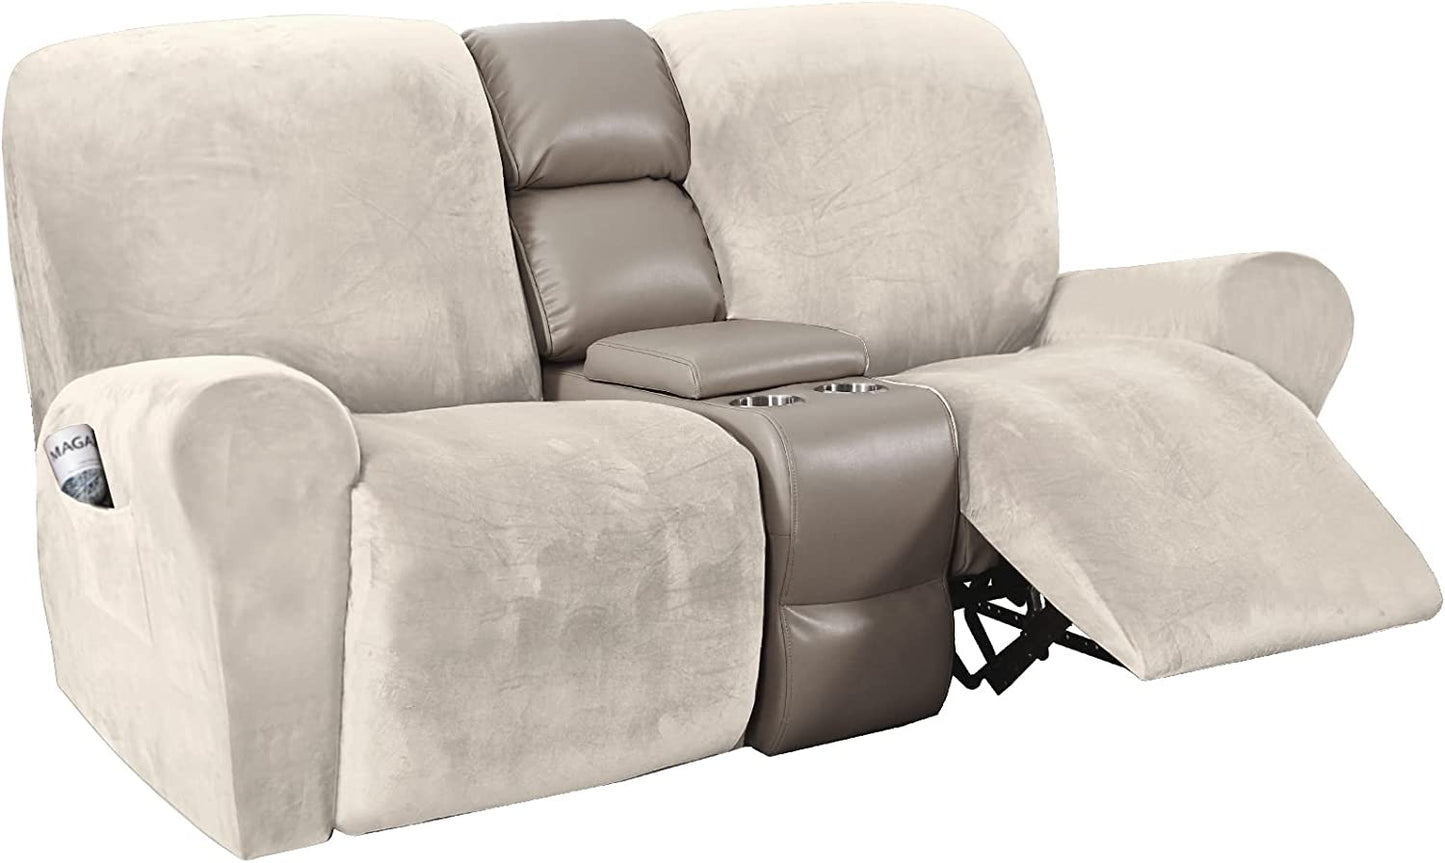 Velvet Stretch Recliner Couch Covers 4-Pieces Style Recliner Chair Covers Recliner Cover for Reclining Chair Slipcovers Feature Non Slip Form Fitted Thick Soft Washable, Grey